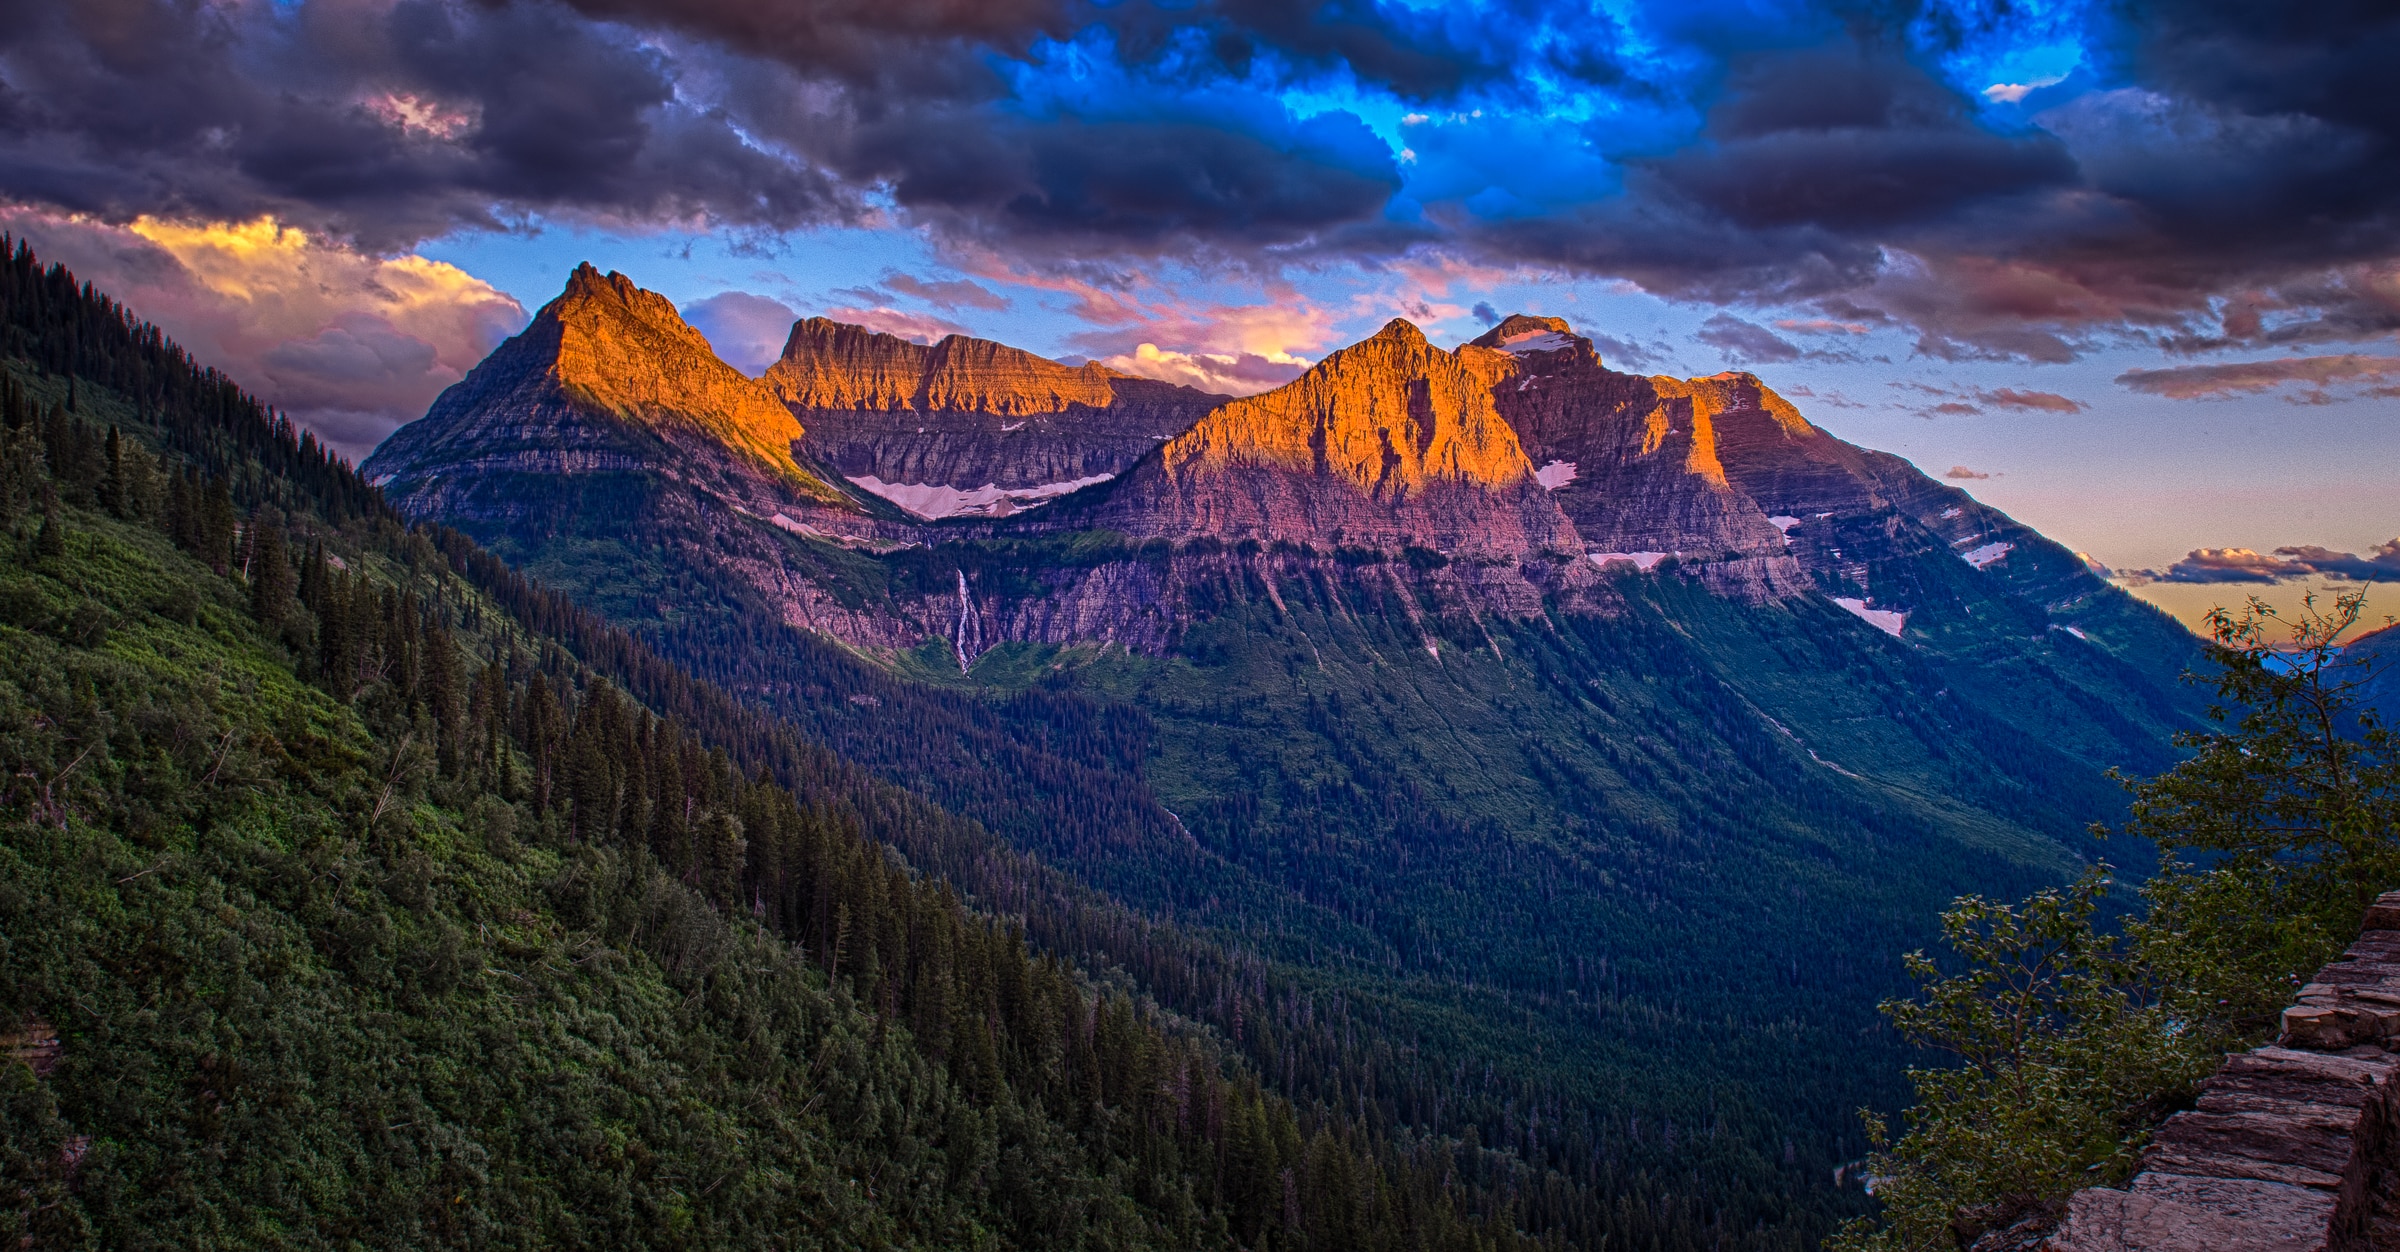 The setting sun lights up peaks along the Going to the Sun Road in Glacier National Park in Montana.